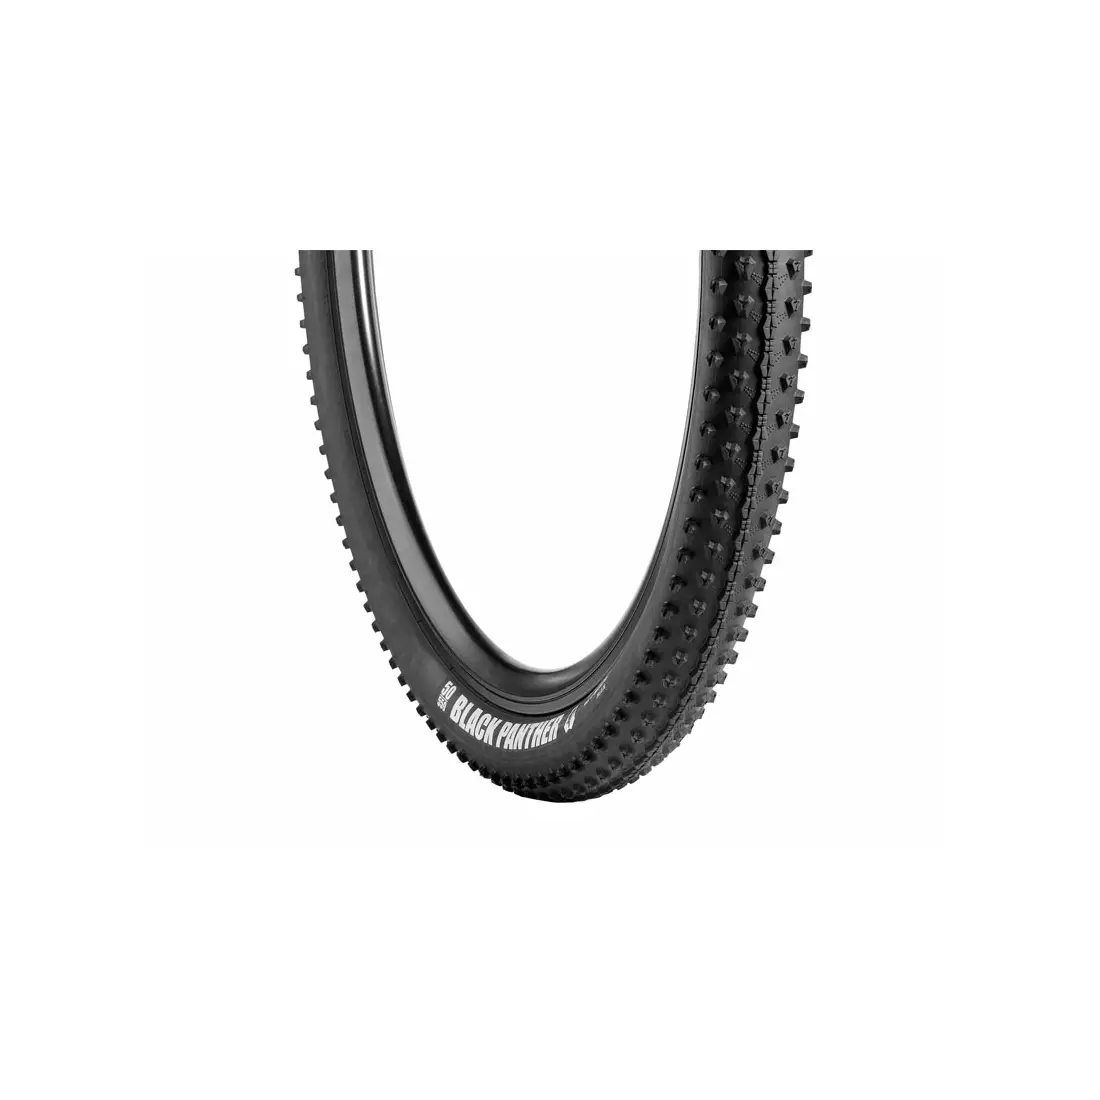 VREDESTEIN BLACK PANTHER XTREME Mtb bicycle tyre 29x2.20 (55-622) TUBELESS READY TPI120 655g black VRD-29206